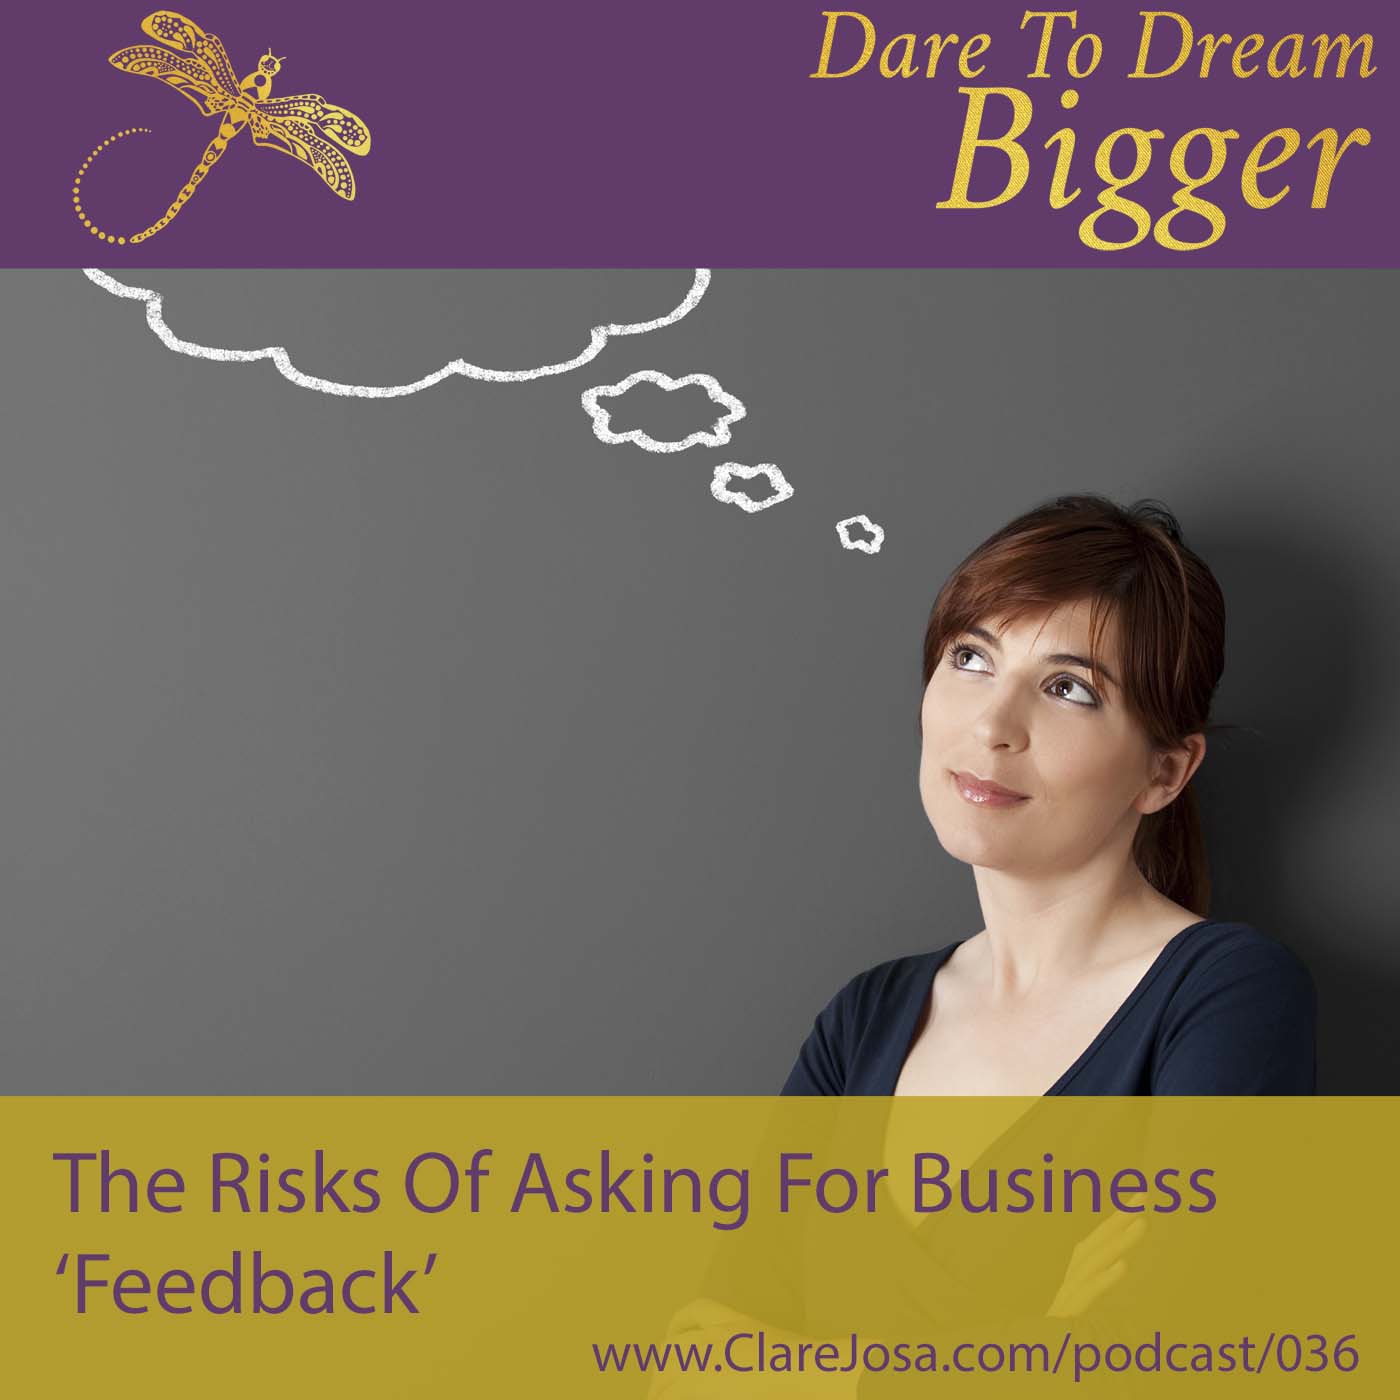 The Hidden Dangers Of Asking For Feedback? AKA How To Pick Up The Pieces Of Your Shattered Self-Esteem! http://www.clarejosa.com/podcast/036/